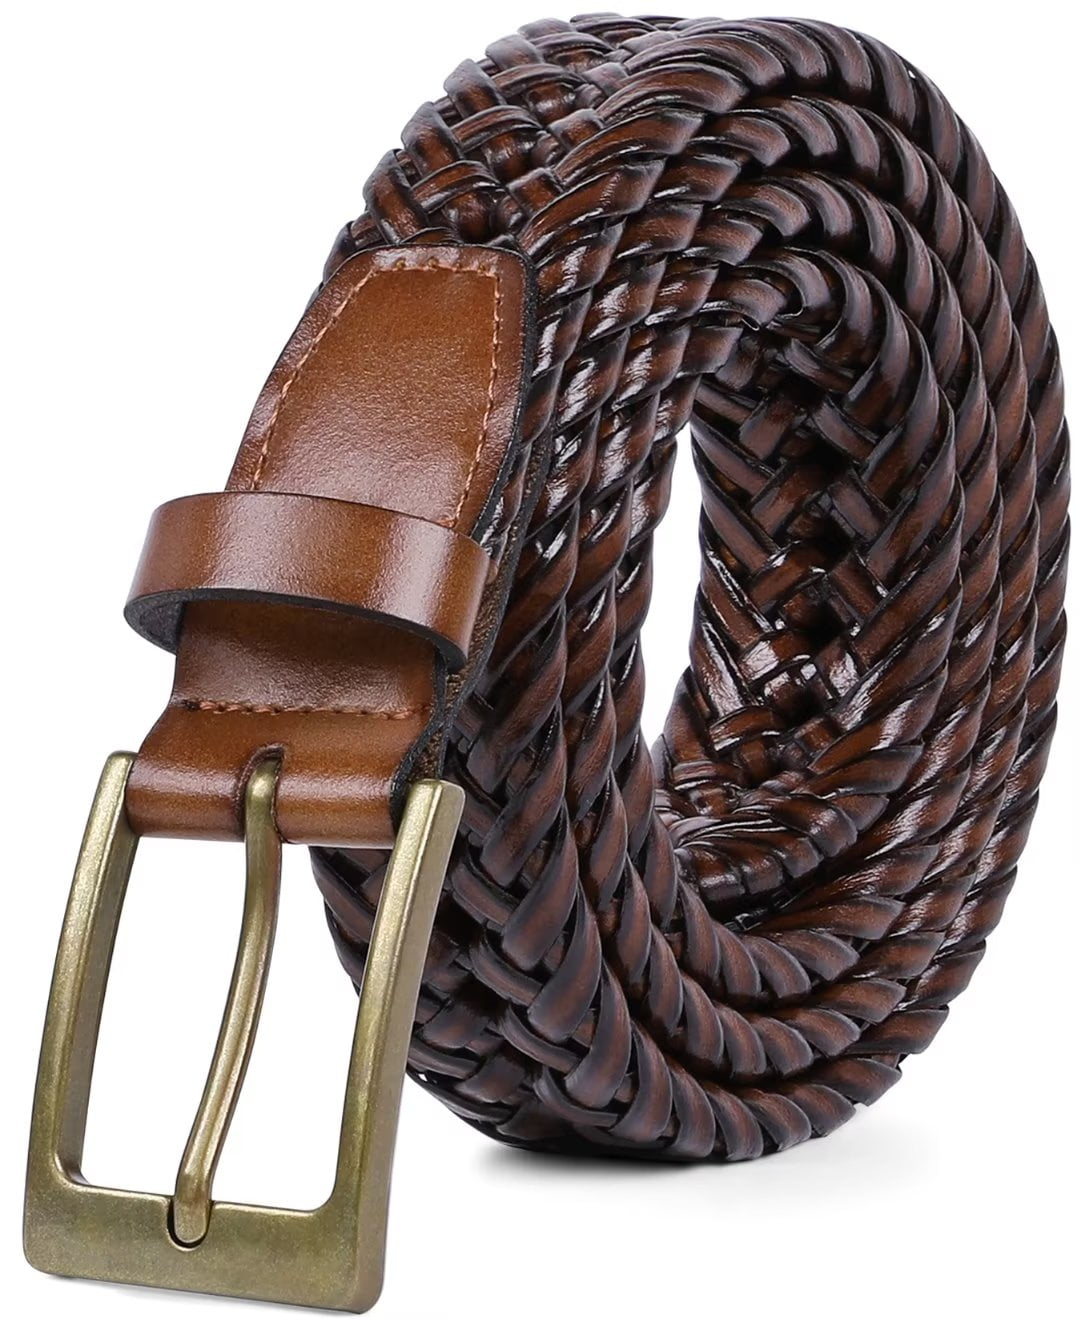 JASGOOD Men's Leather Braided Belts Brown Cowhide Woven Belt for Jeans ...